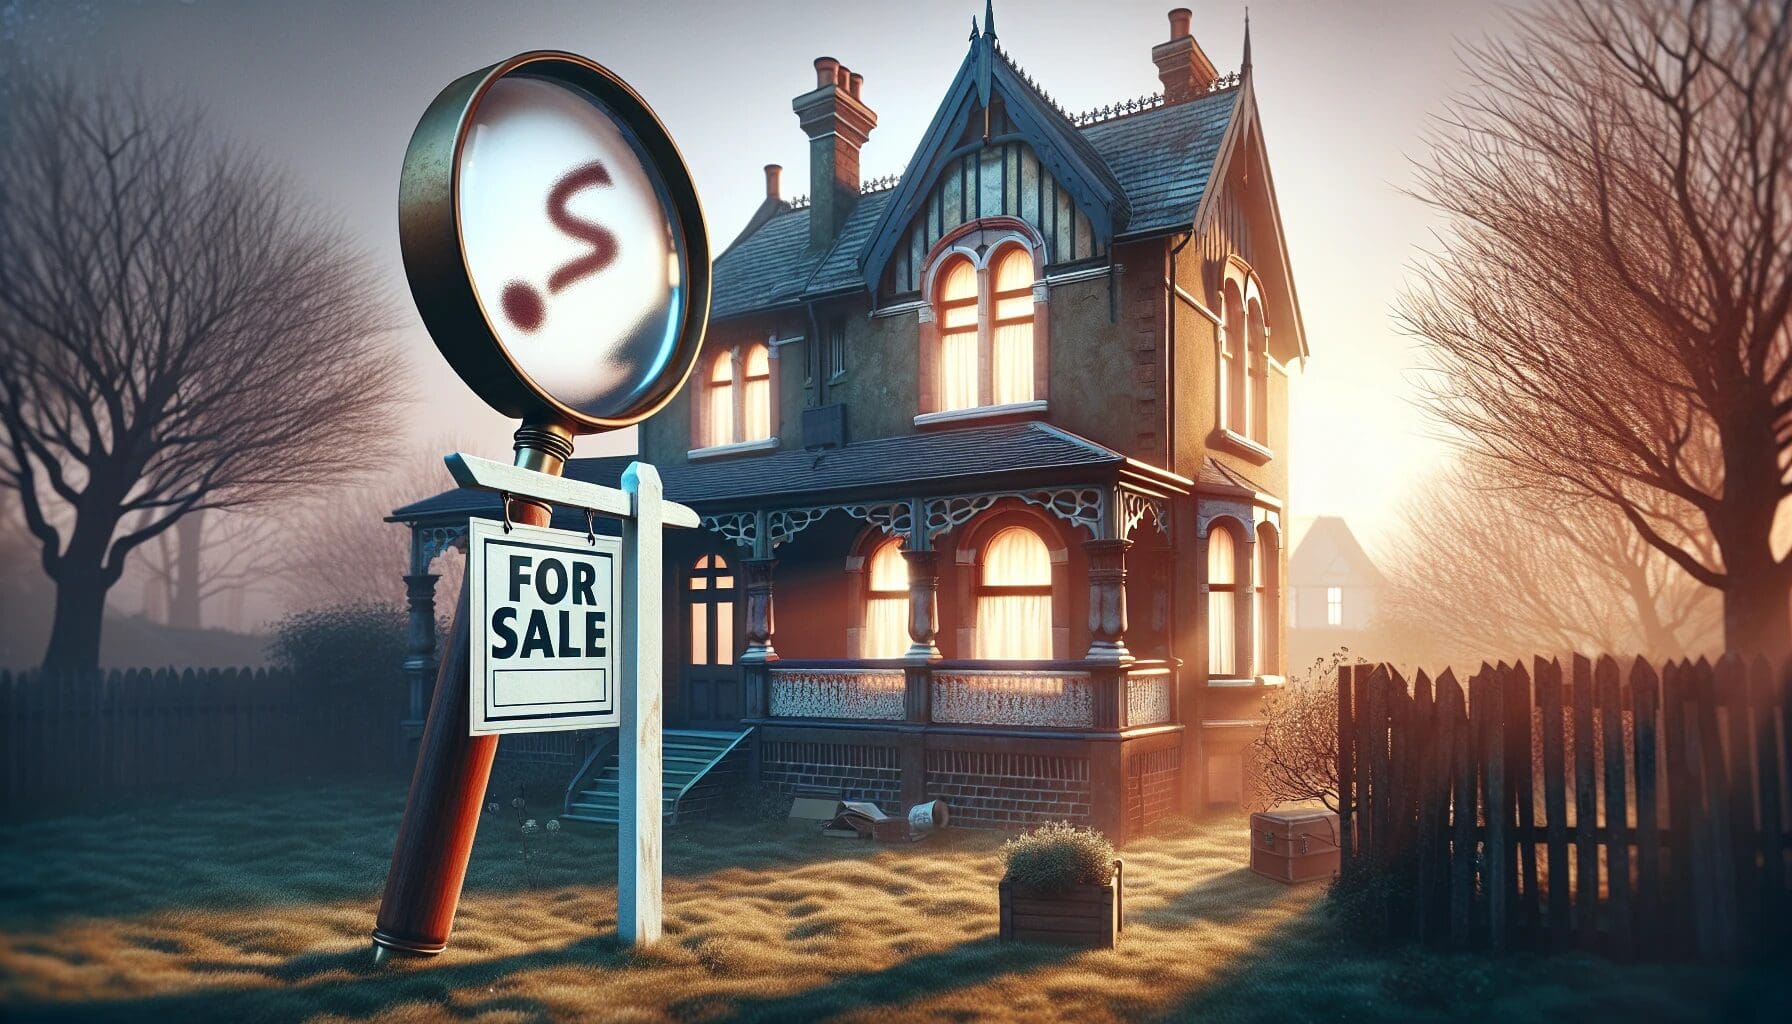 Illustration of a house with a 'For Sale' sign and a magnifying glass representing marketing strategies